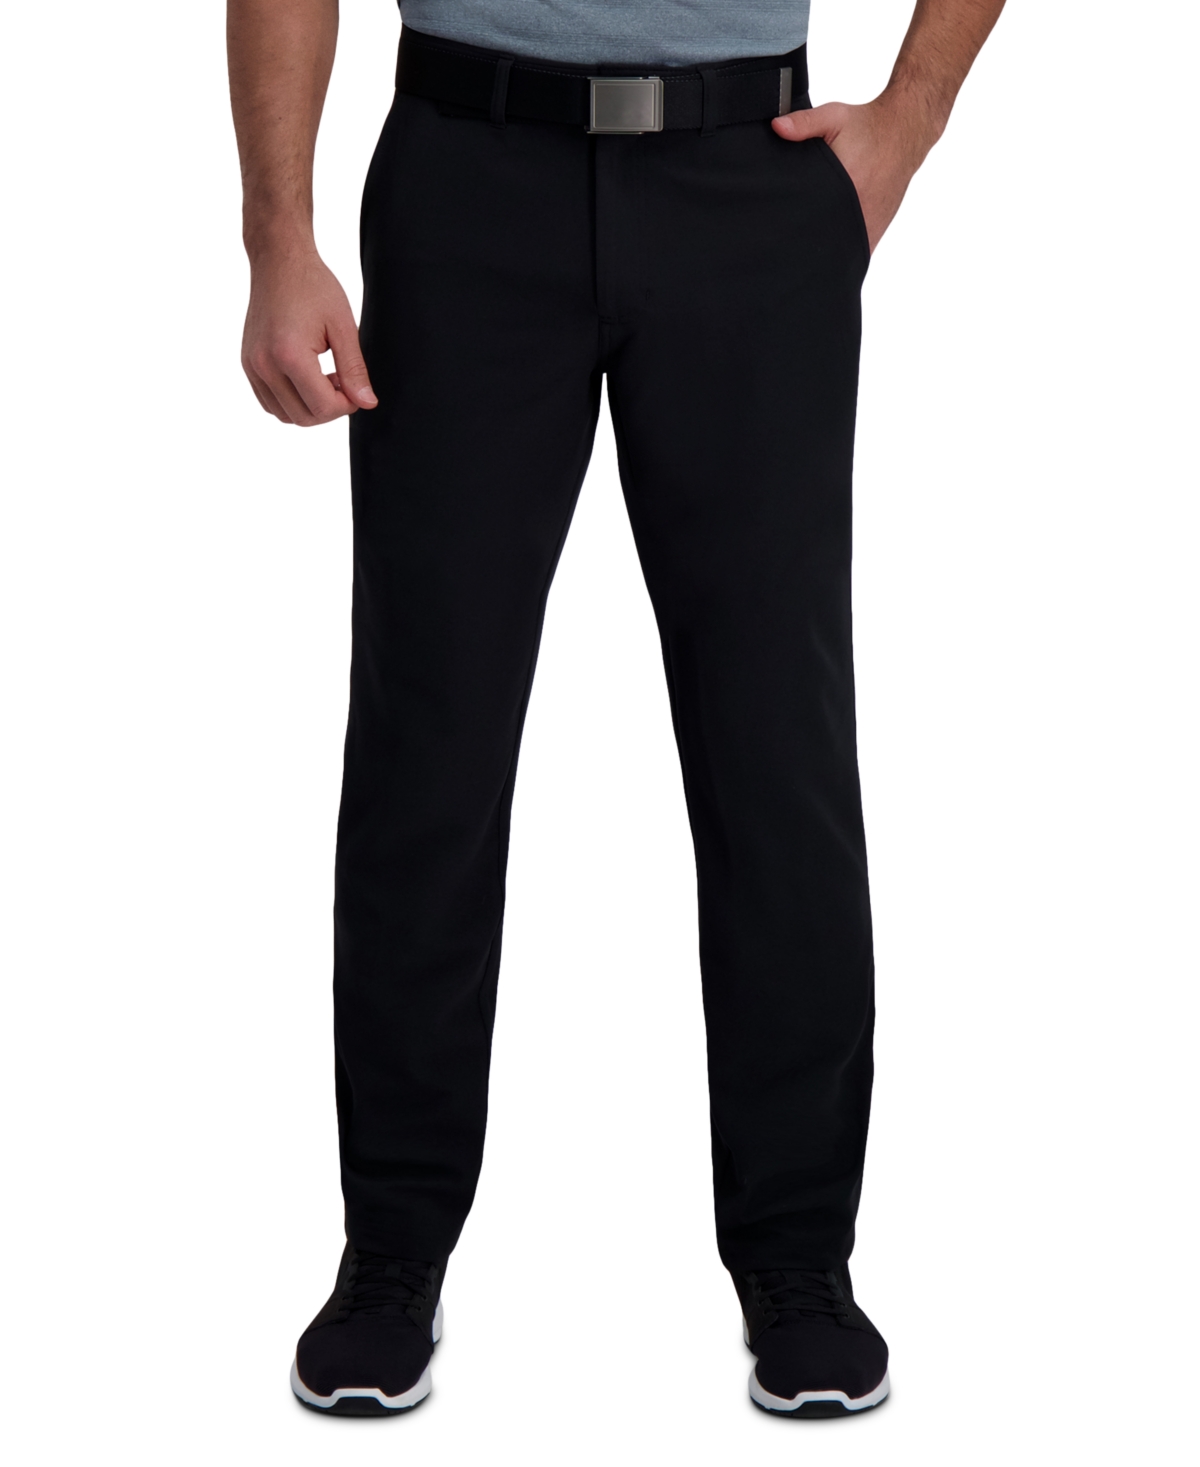 The Active Series Slim-Straight Fit Flat Front Urban Pant - Black